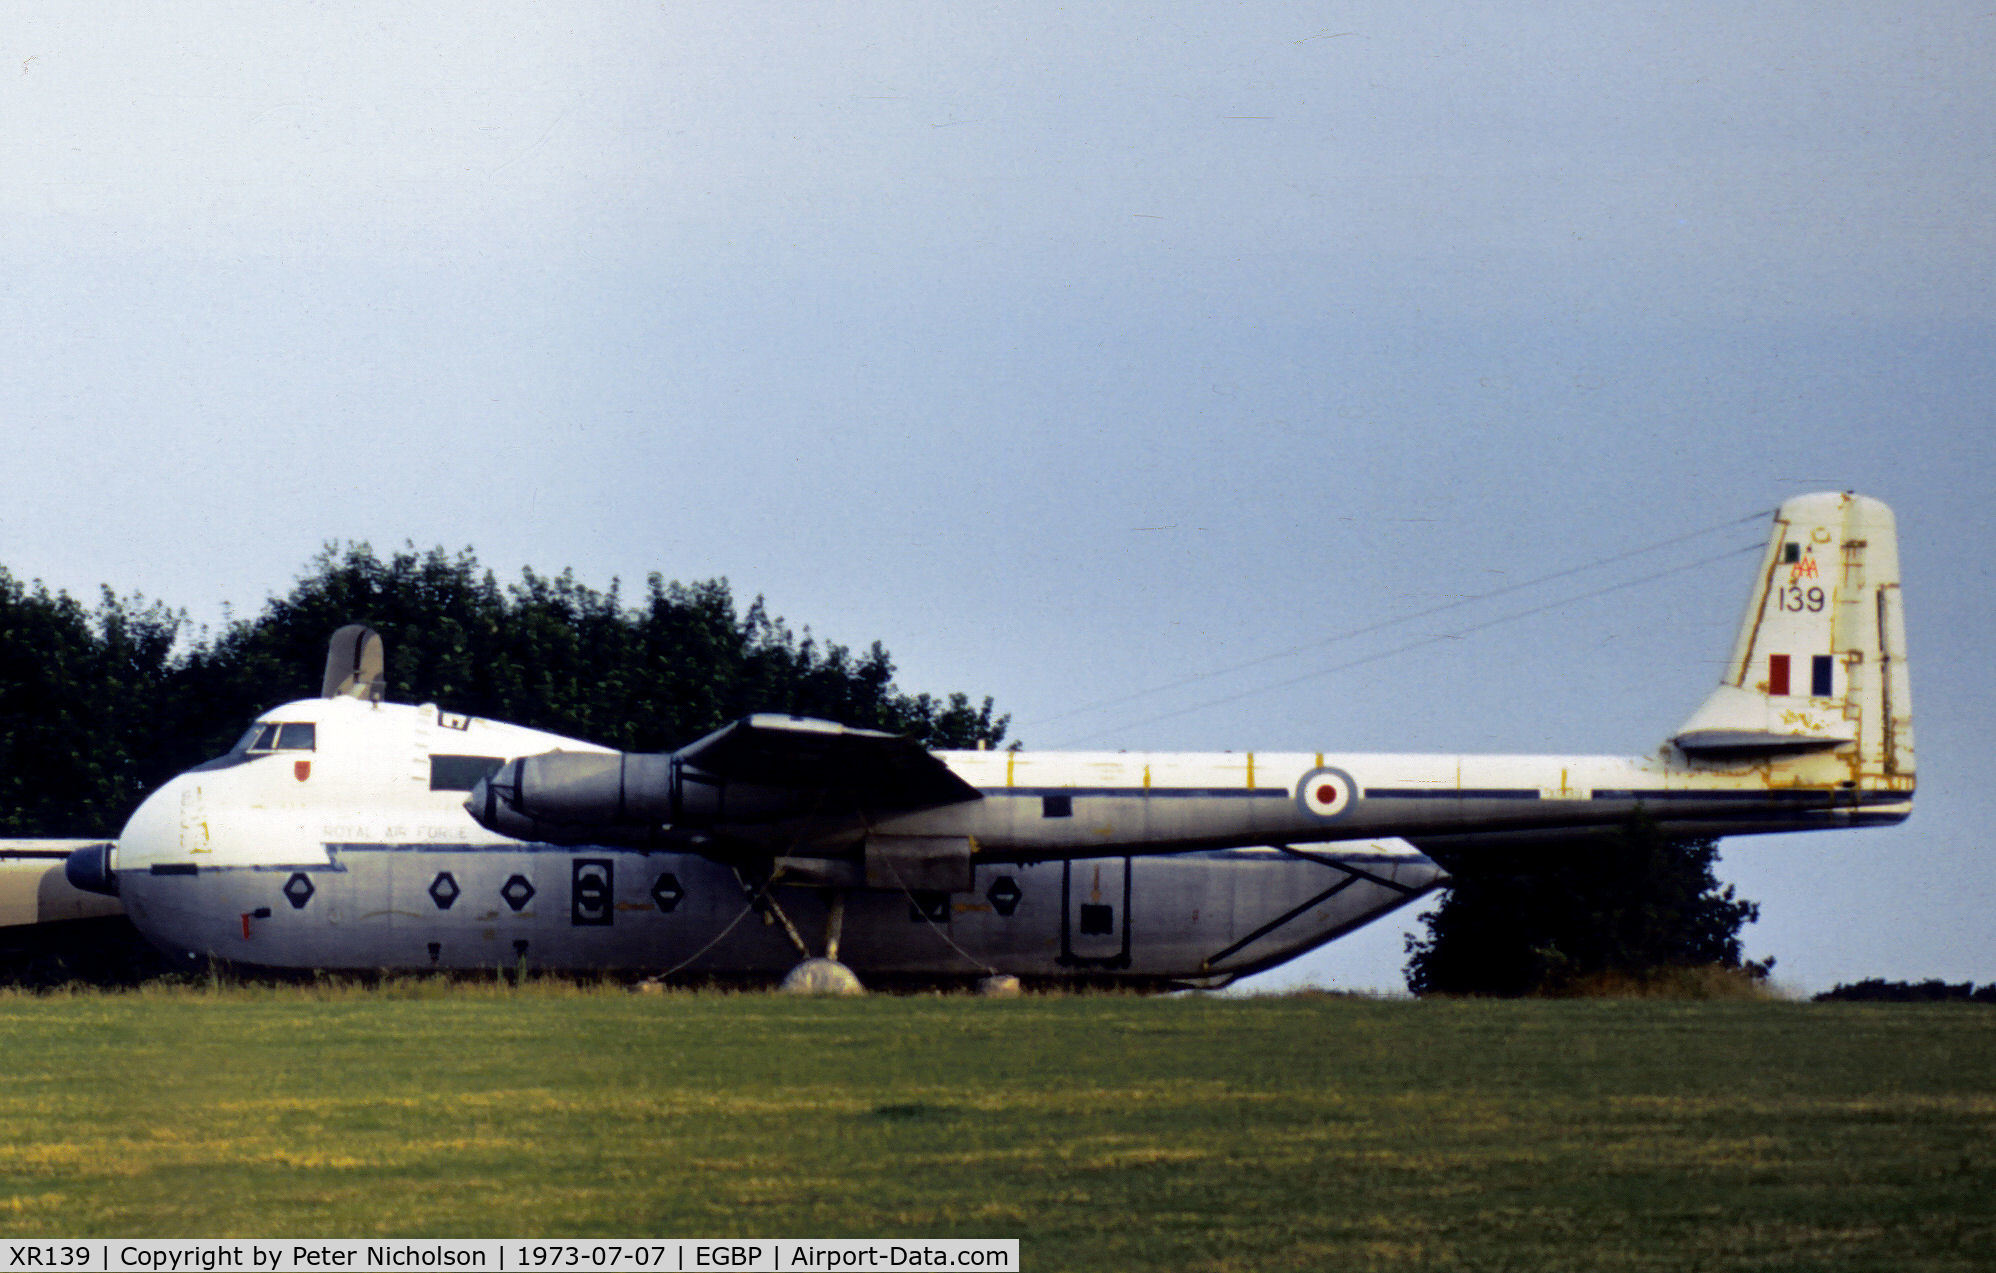 XR139, 1963 Armstrong Whitworth AW-660 Argosy C.1 C/N 6794, Argosy C.1 of 114 Squadron in storage at No.5 Maintenance Unit at RAF Kemble in the Summer of 1973.